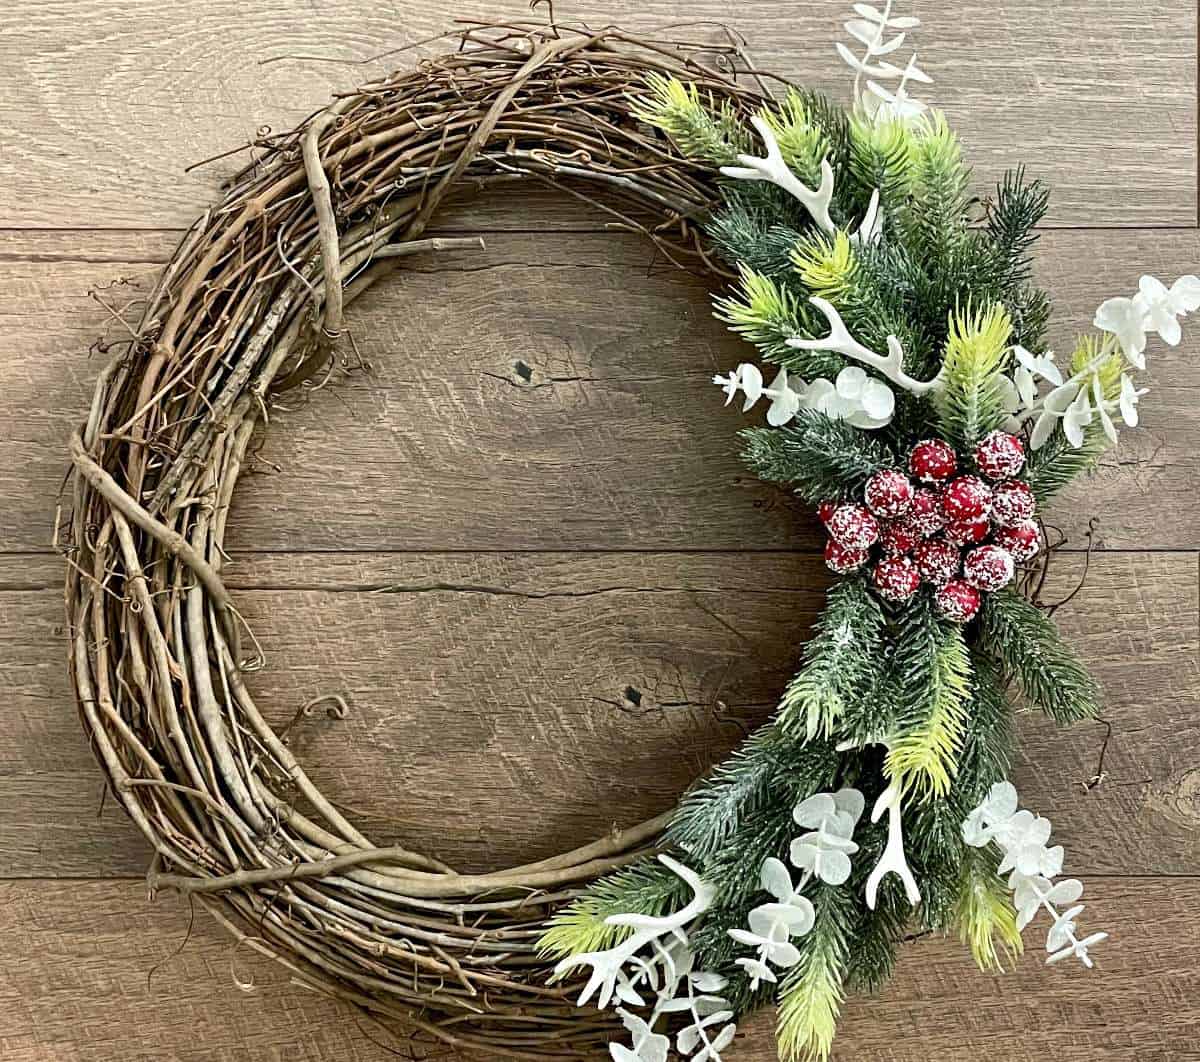 Winter Grapevine Wreath for the Holidays